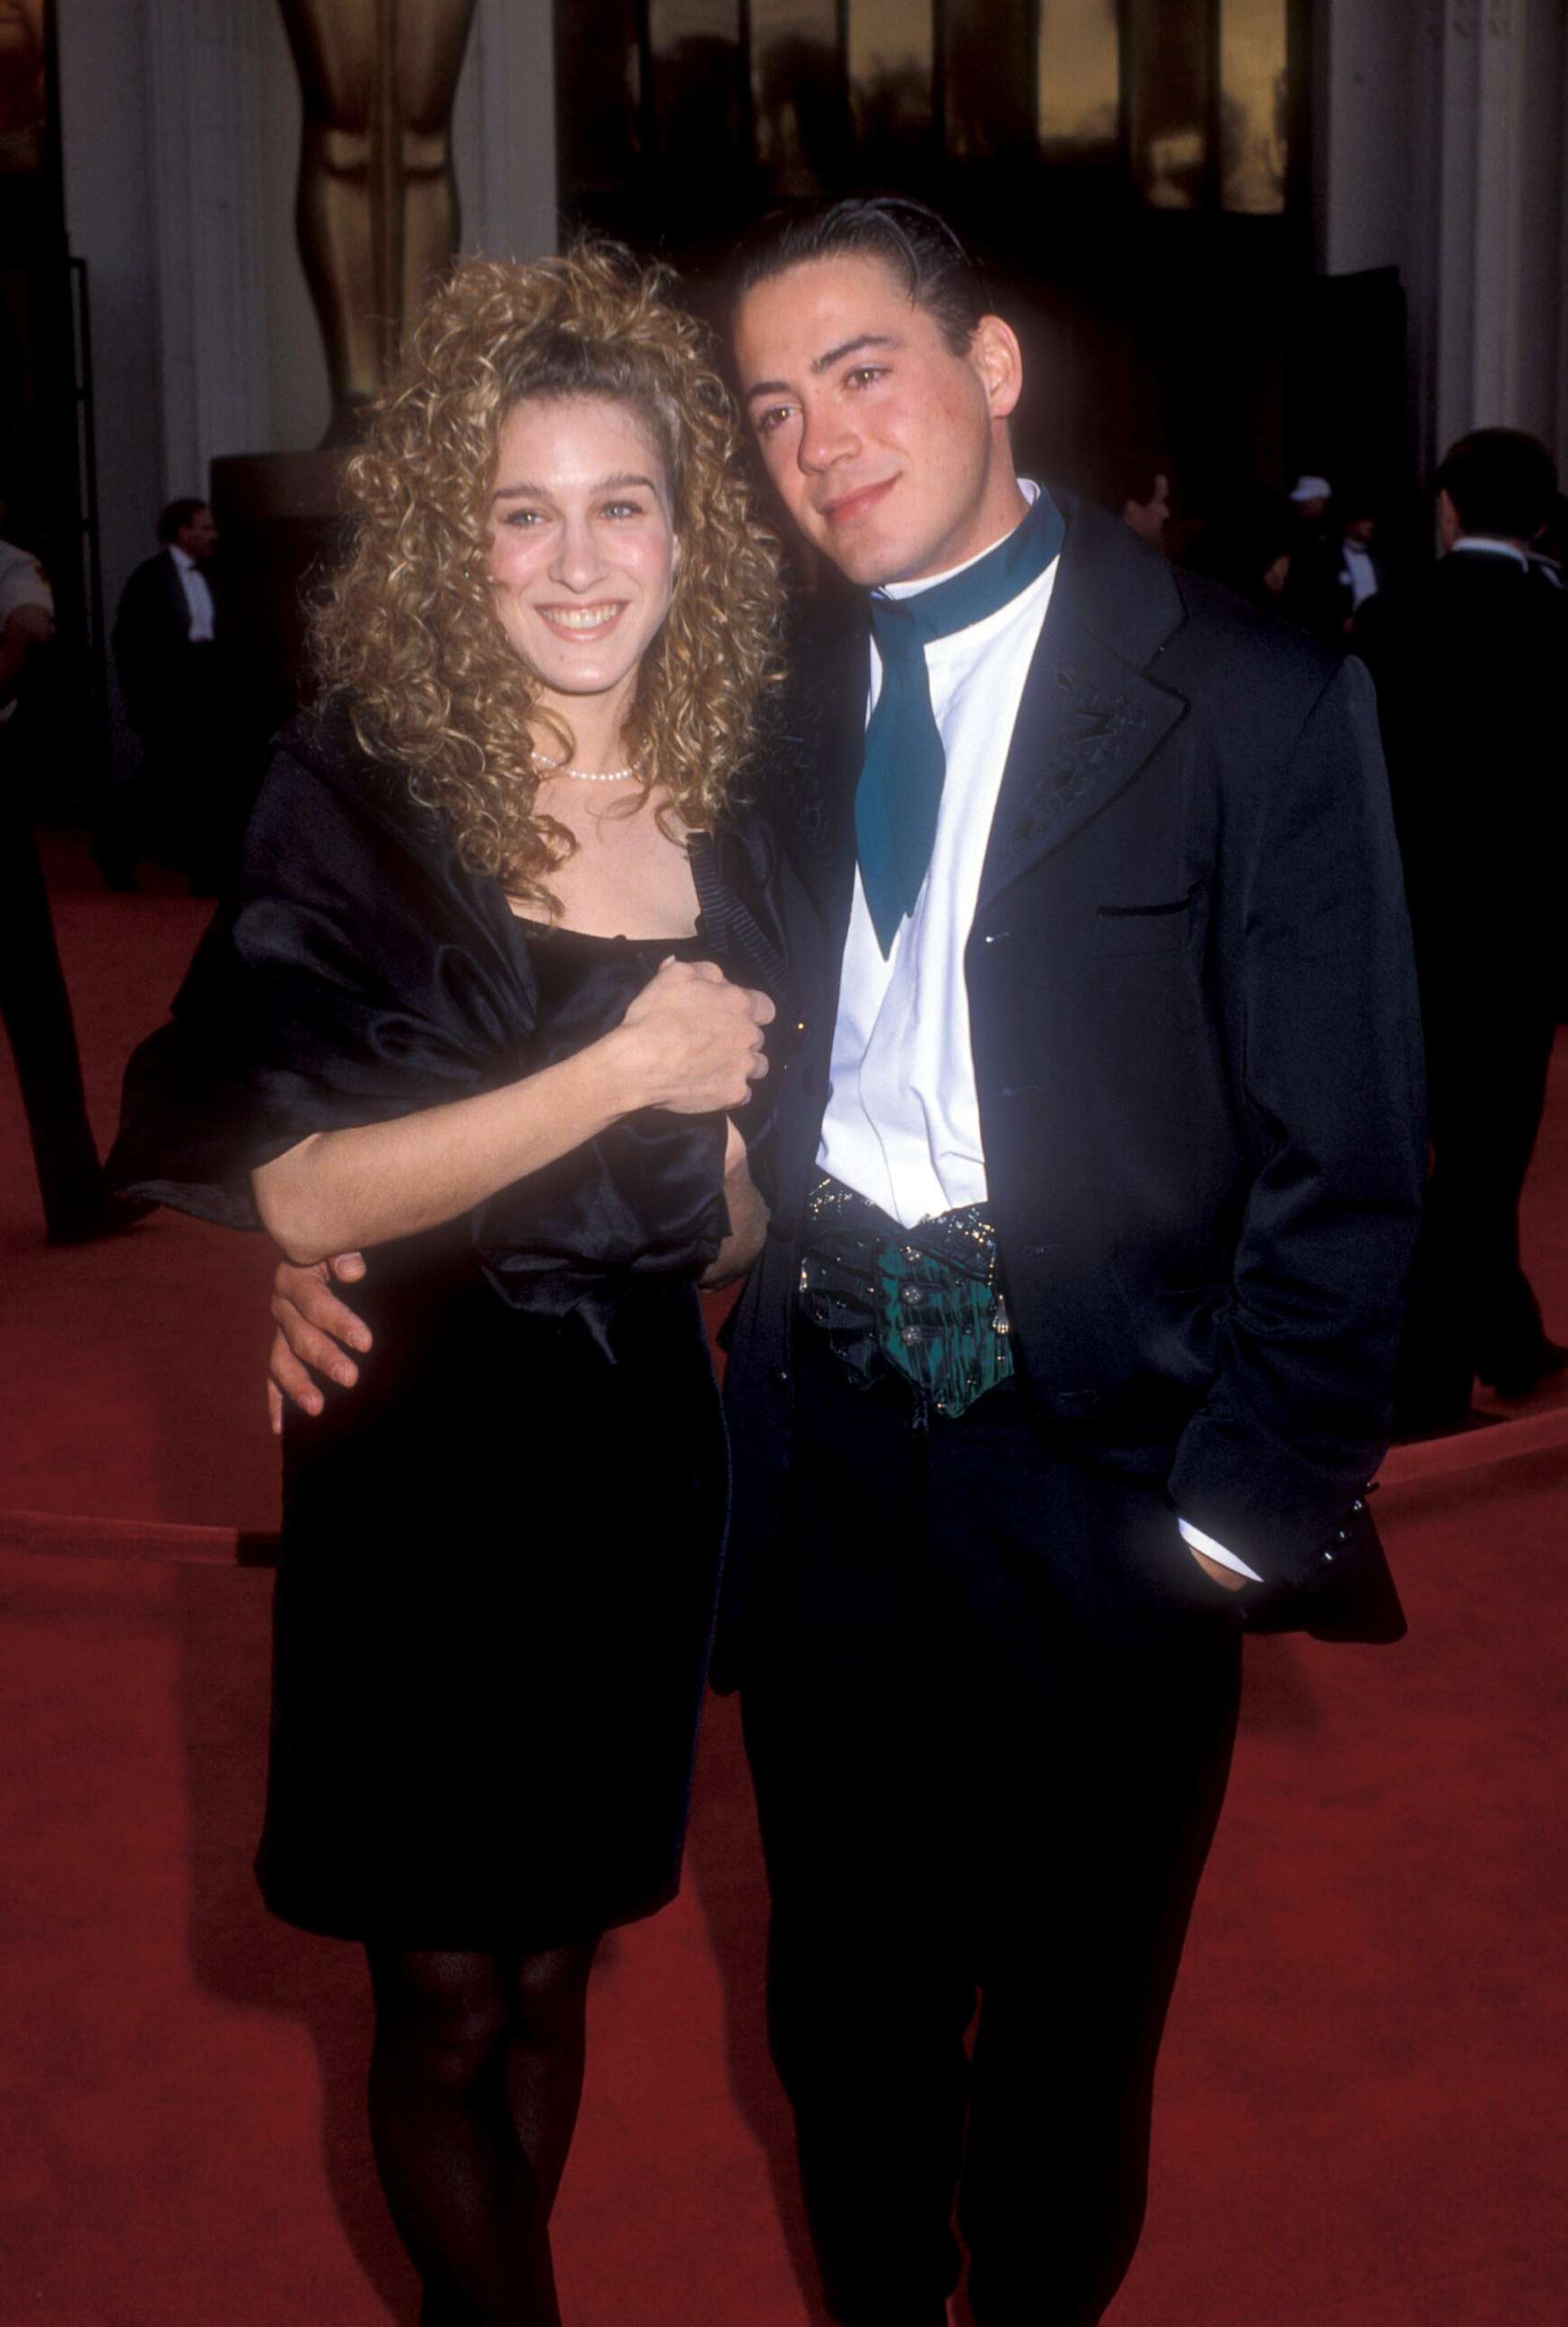 PHOTO: Sarah Jessica Parker and Robert Downey Jr. arrive for the 61st Annual Academy Awards at the Shrine Auditorium in Los Angeles, March 29, 1989.